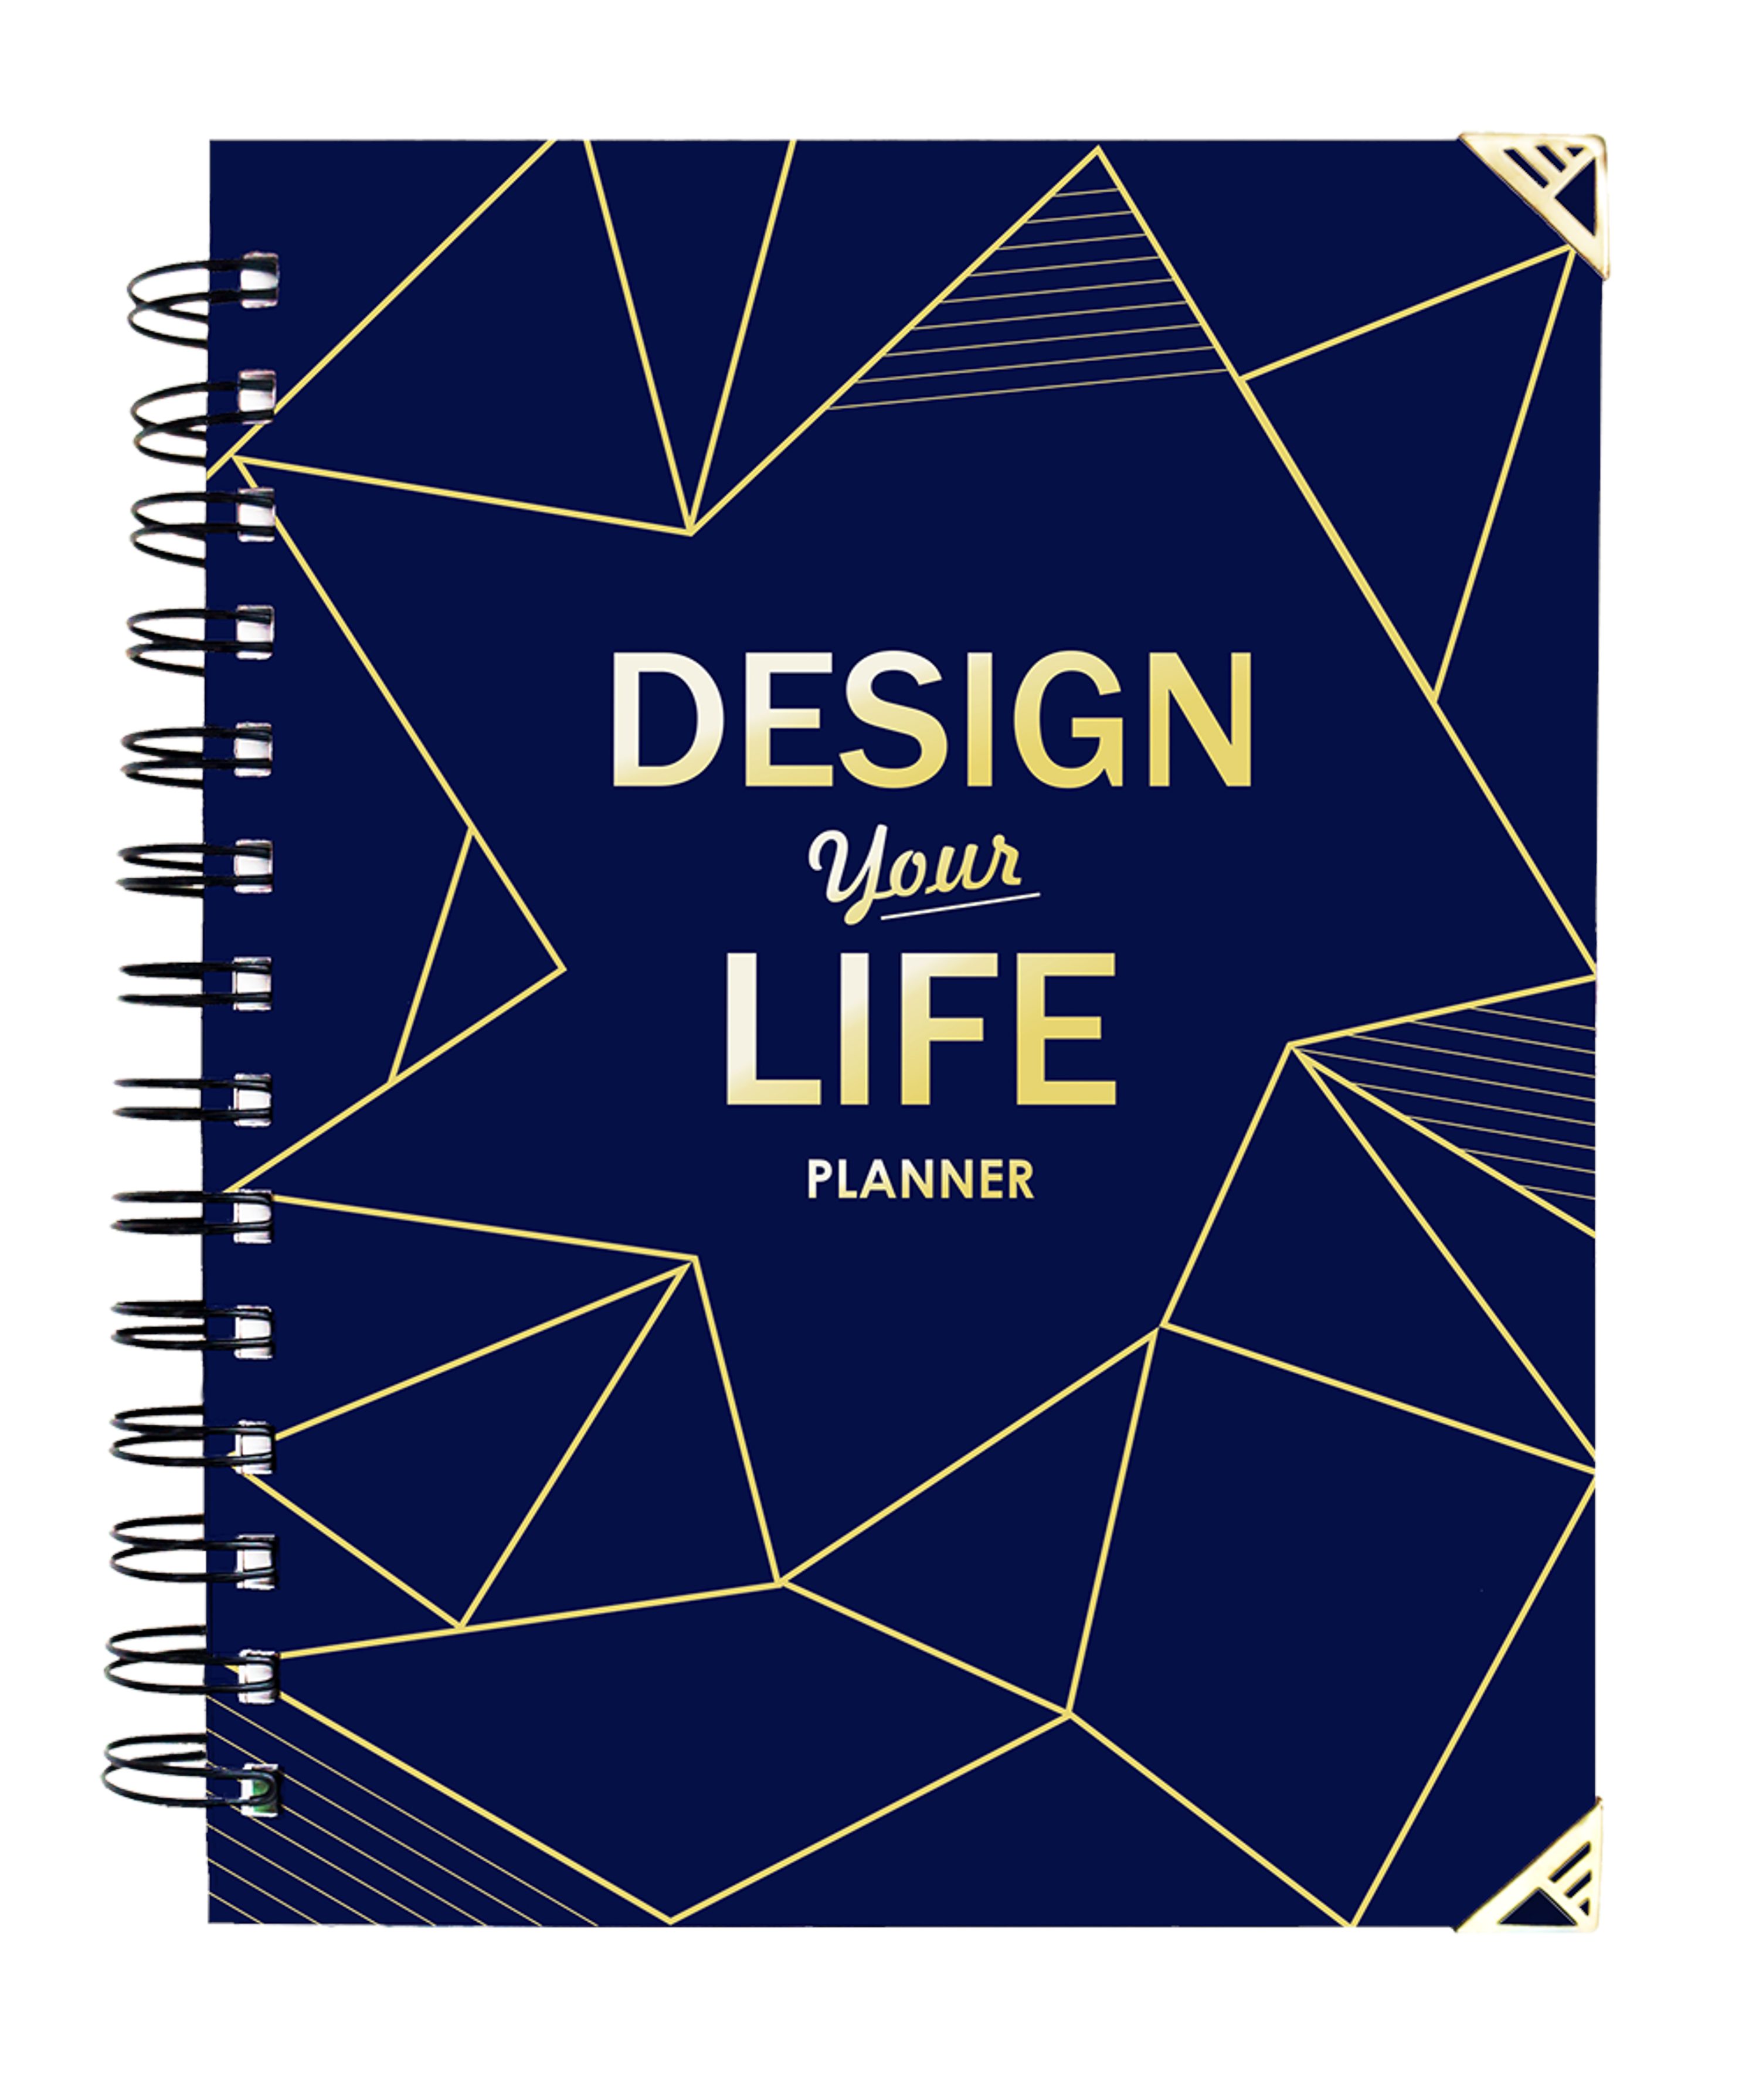 Design Your Life planner, P595. Photo courtesy of CNS Designs 